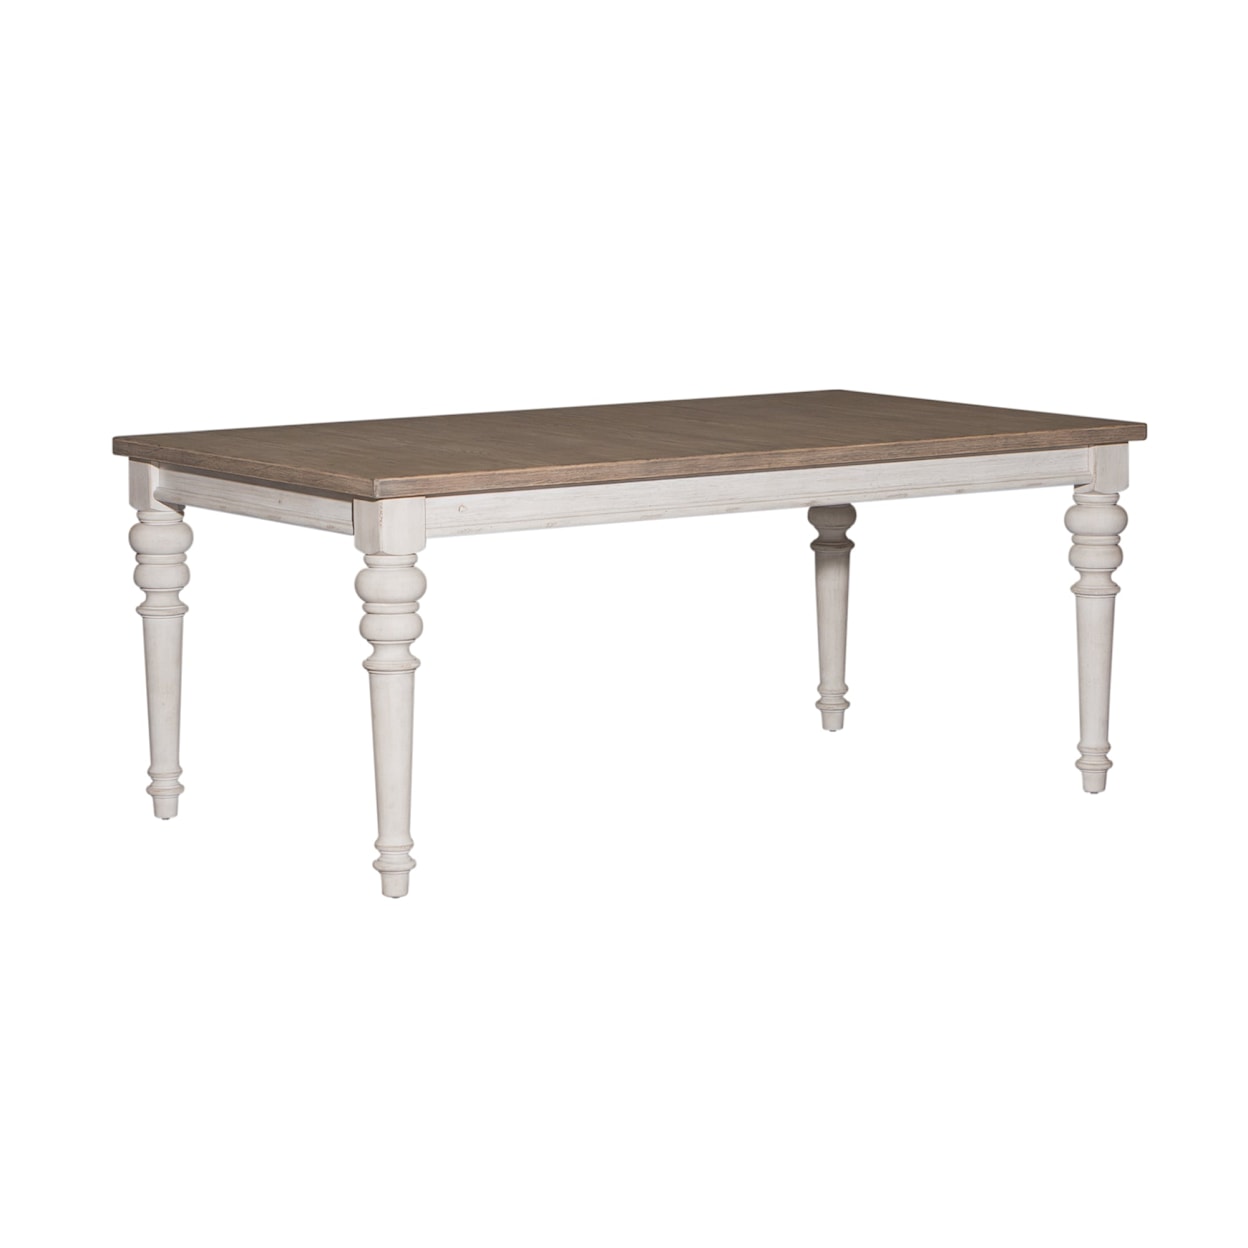 Libby Haven Rectangular Dining Table